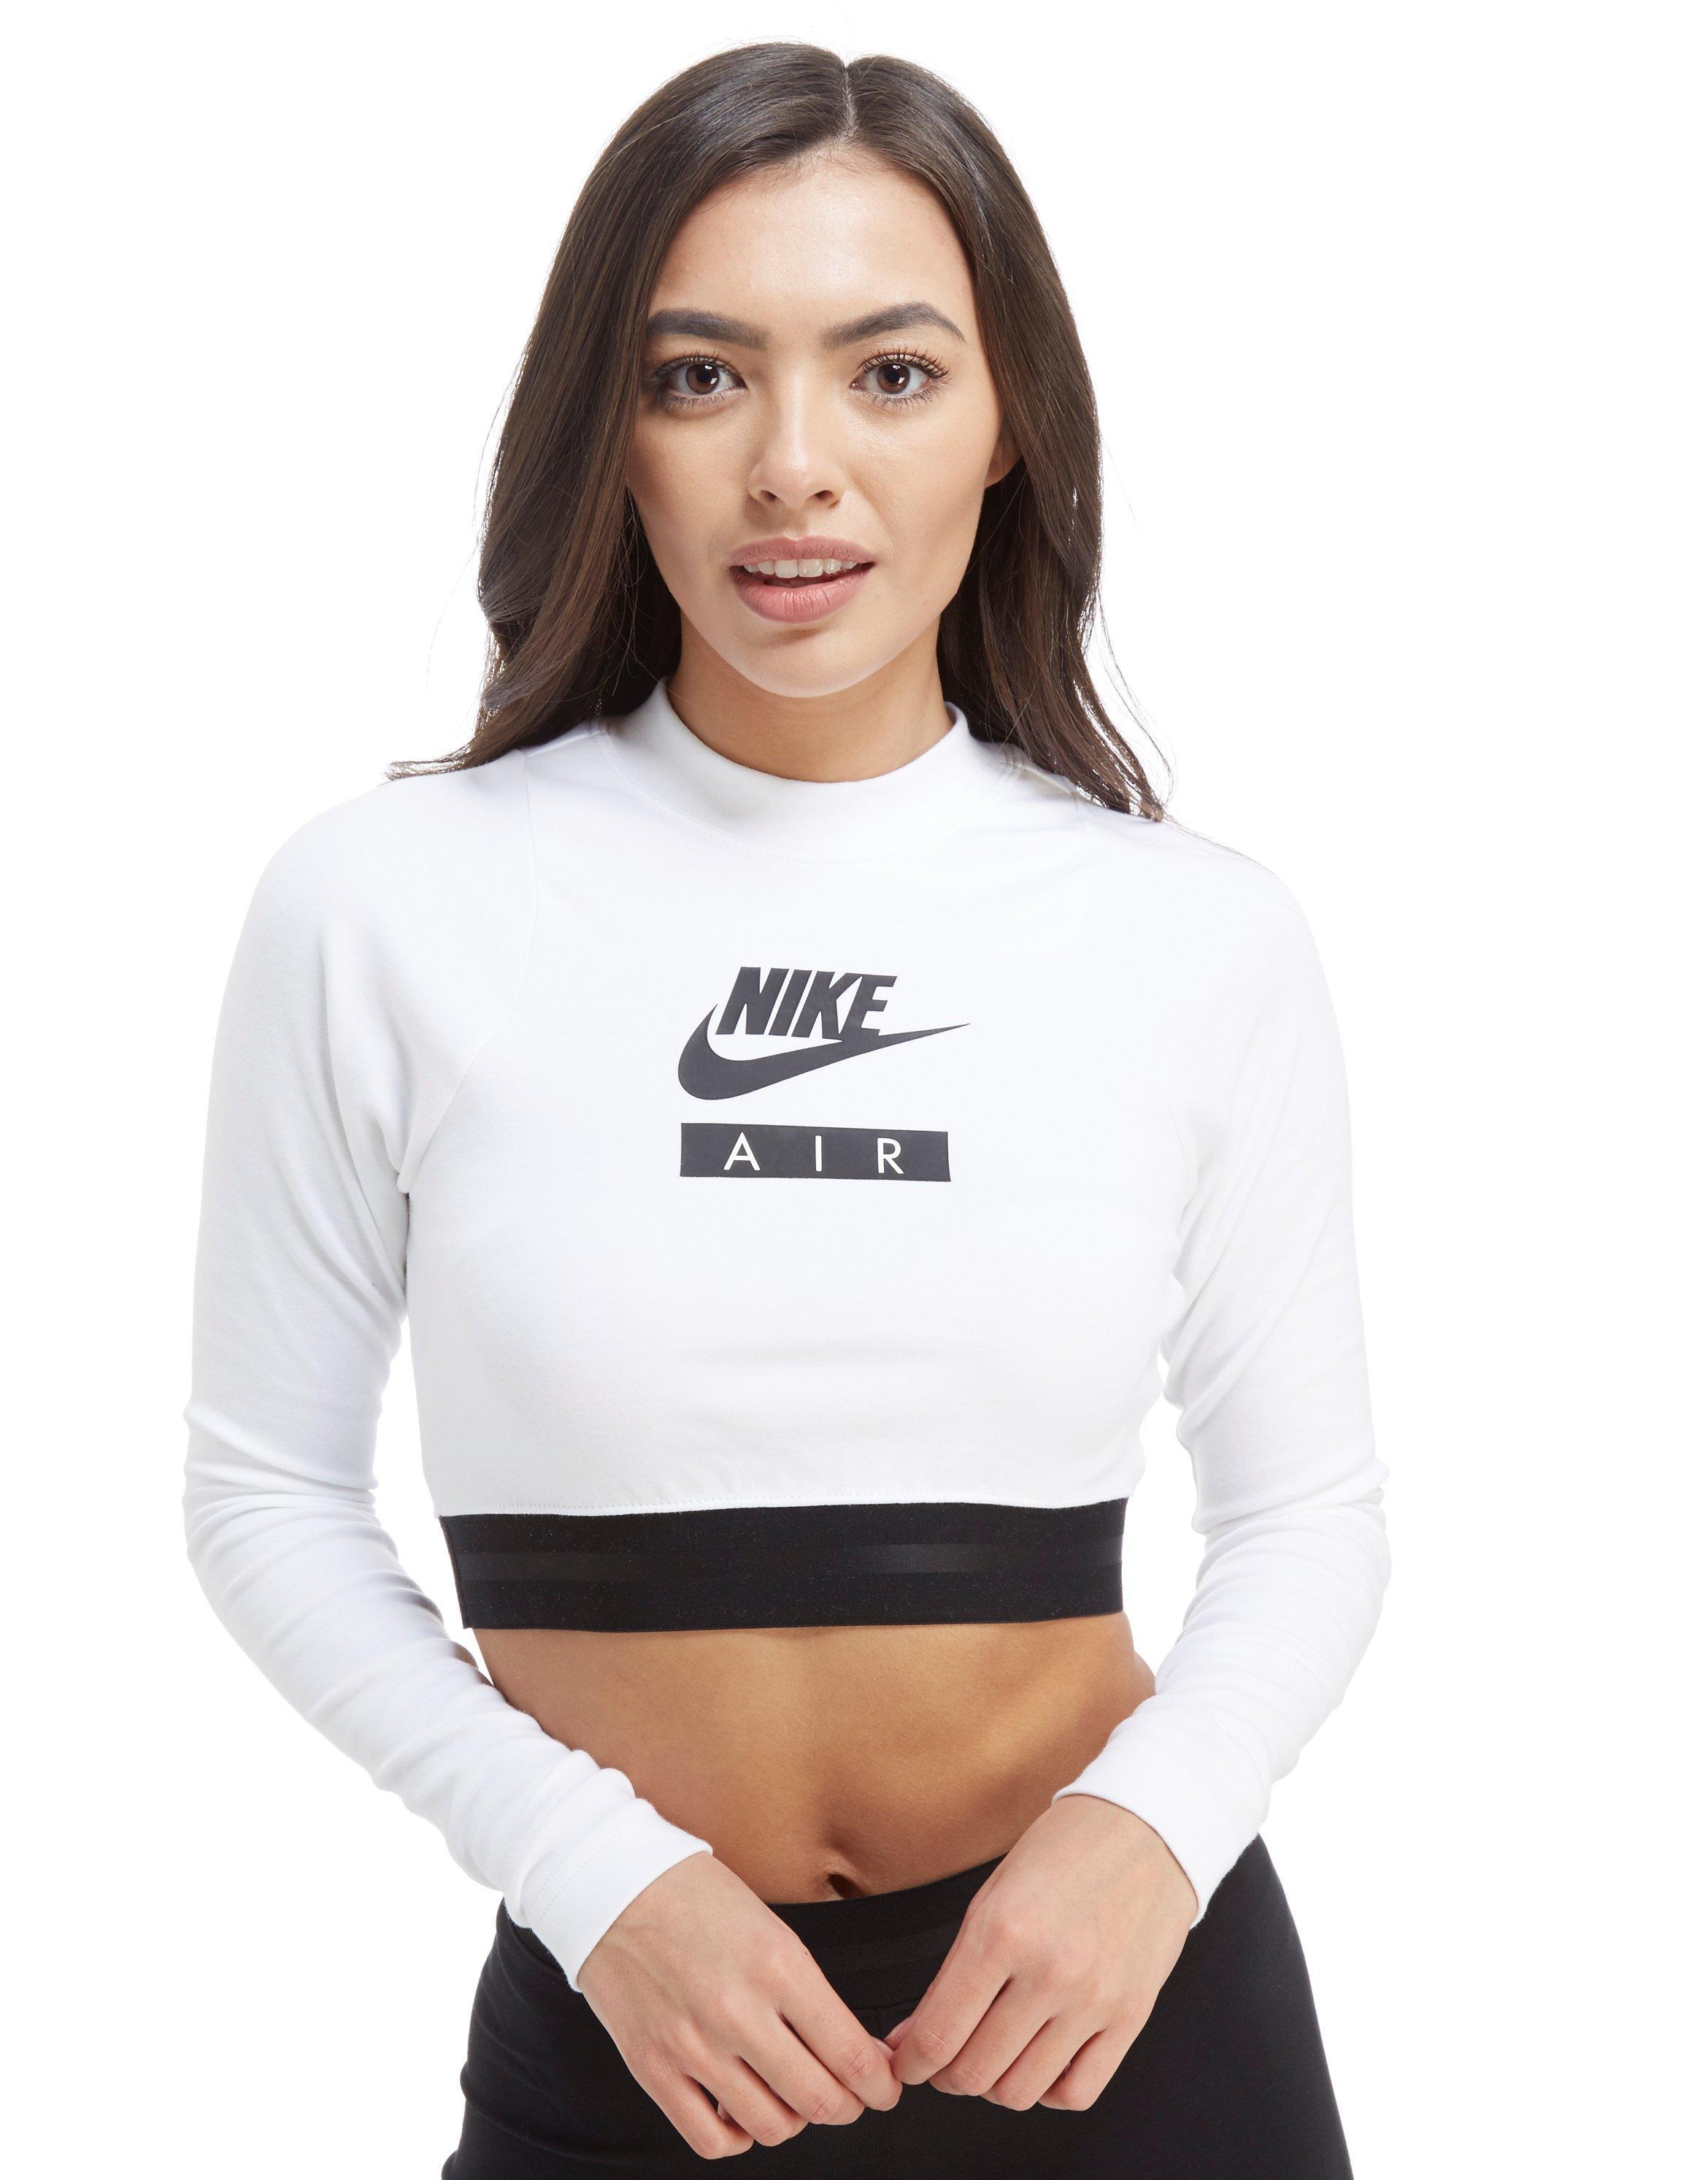 Nike Cotton Air Long Sleeve Crop Top in White/Black (White) - Lyst